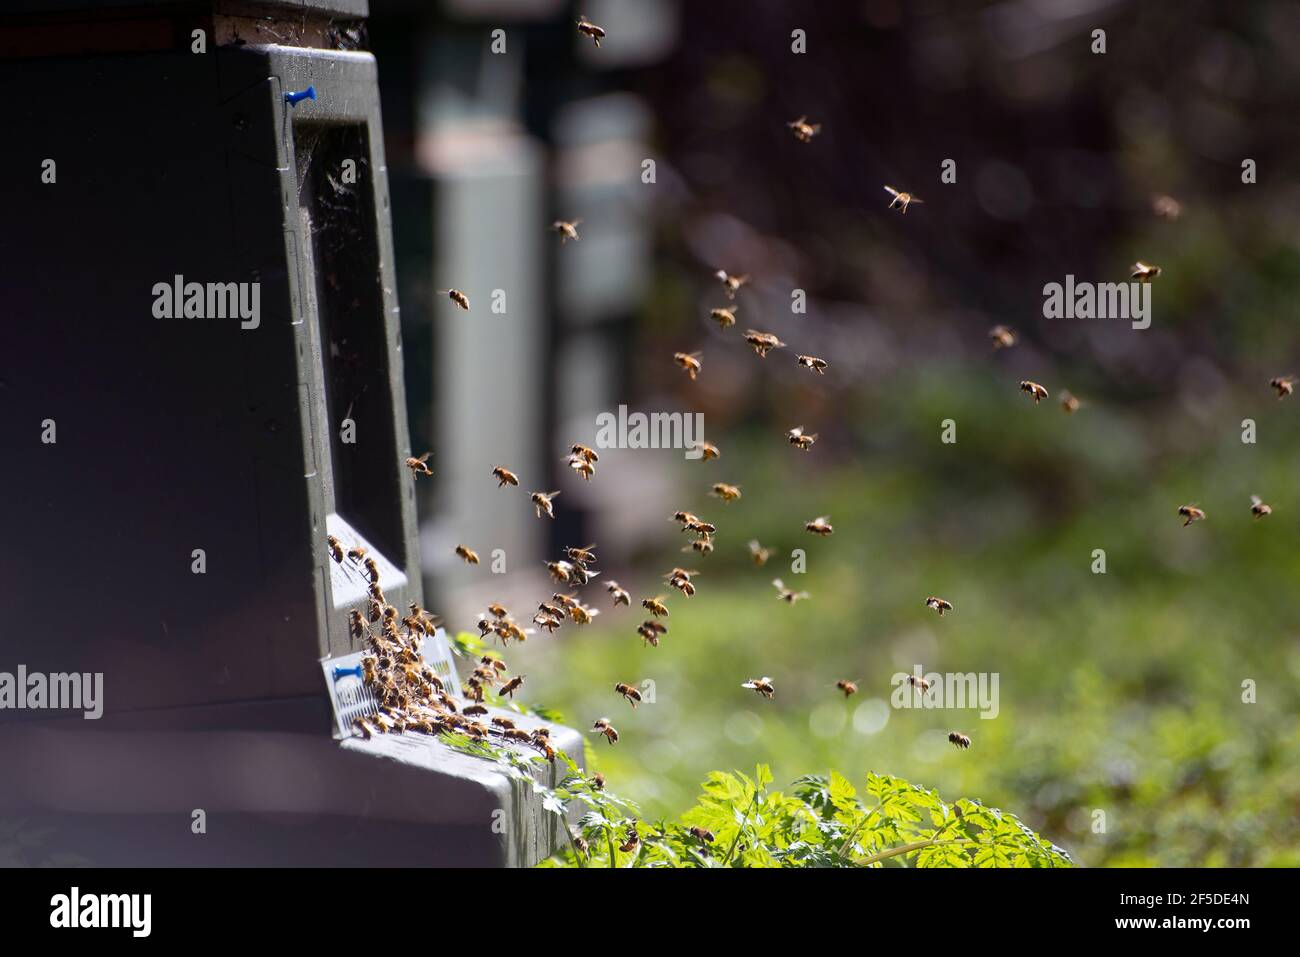 Bees flying into a manmade hive. Blurred green backgound. Stock Photo